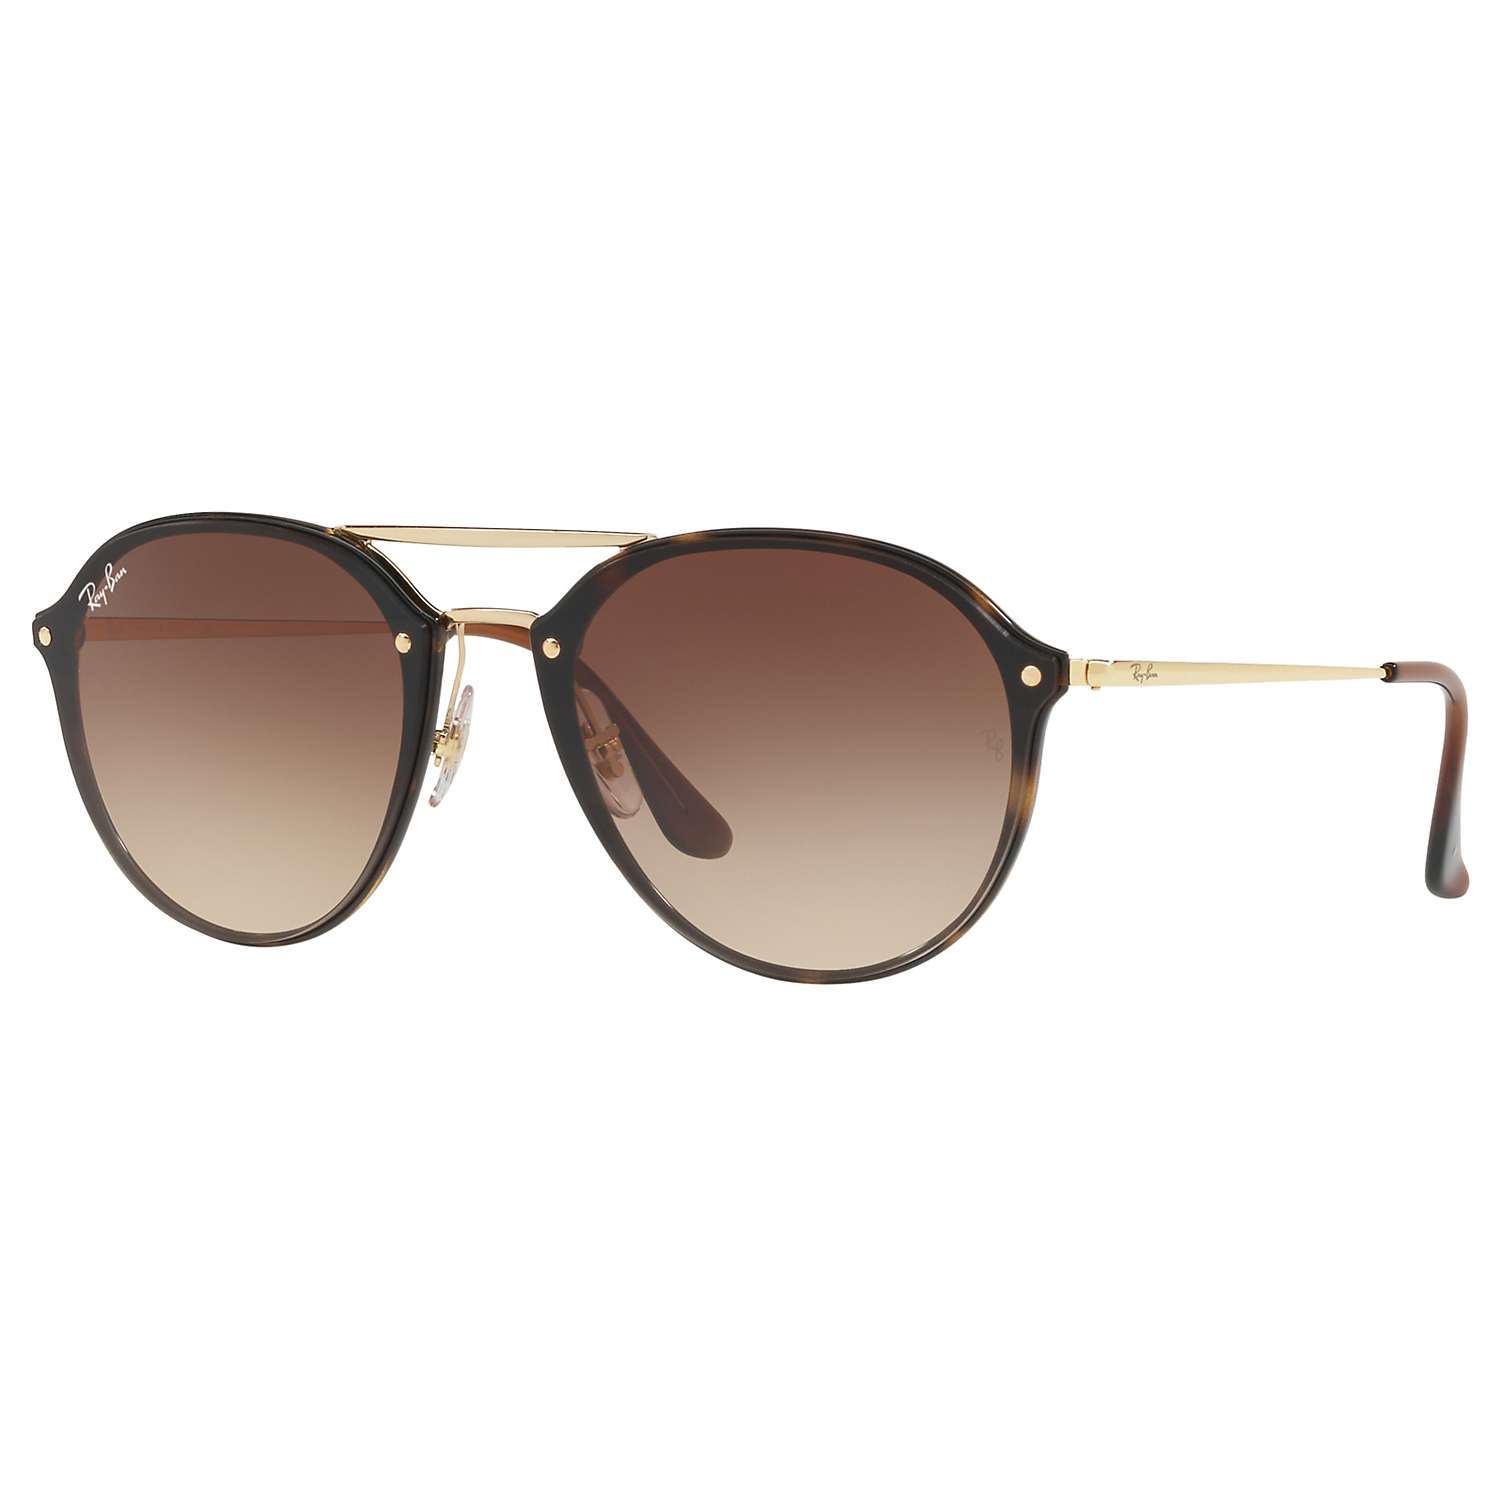 Buy Ray-Ban RB4292 Oval Blaze Sunglasses, Gold/Brown Online at johnlewis.com